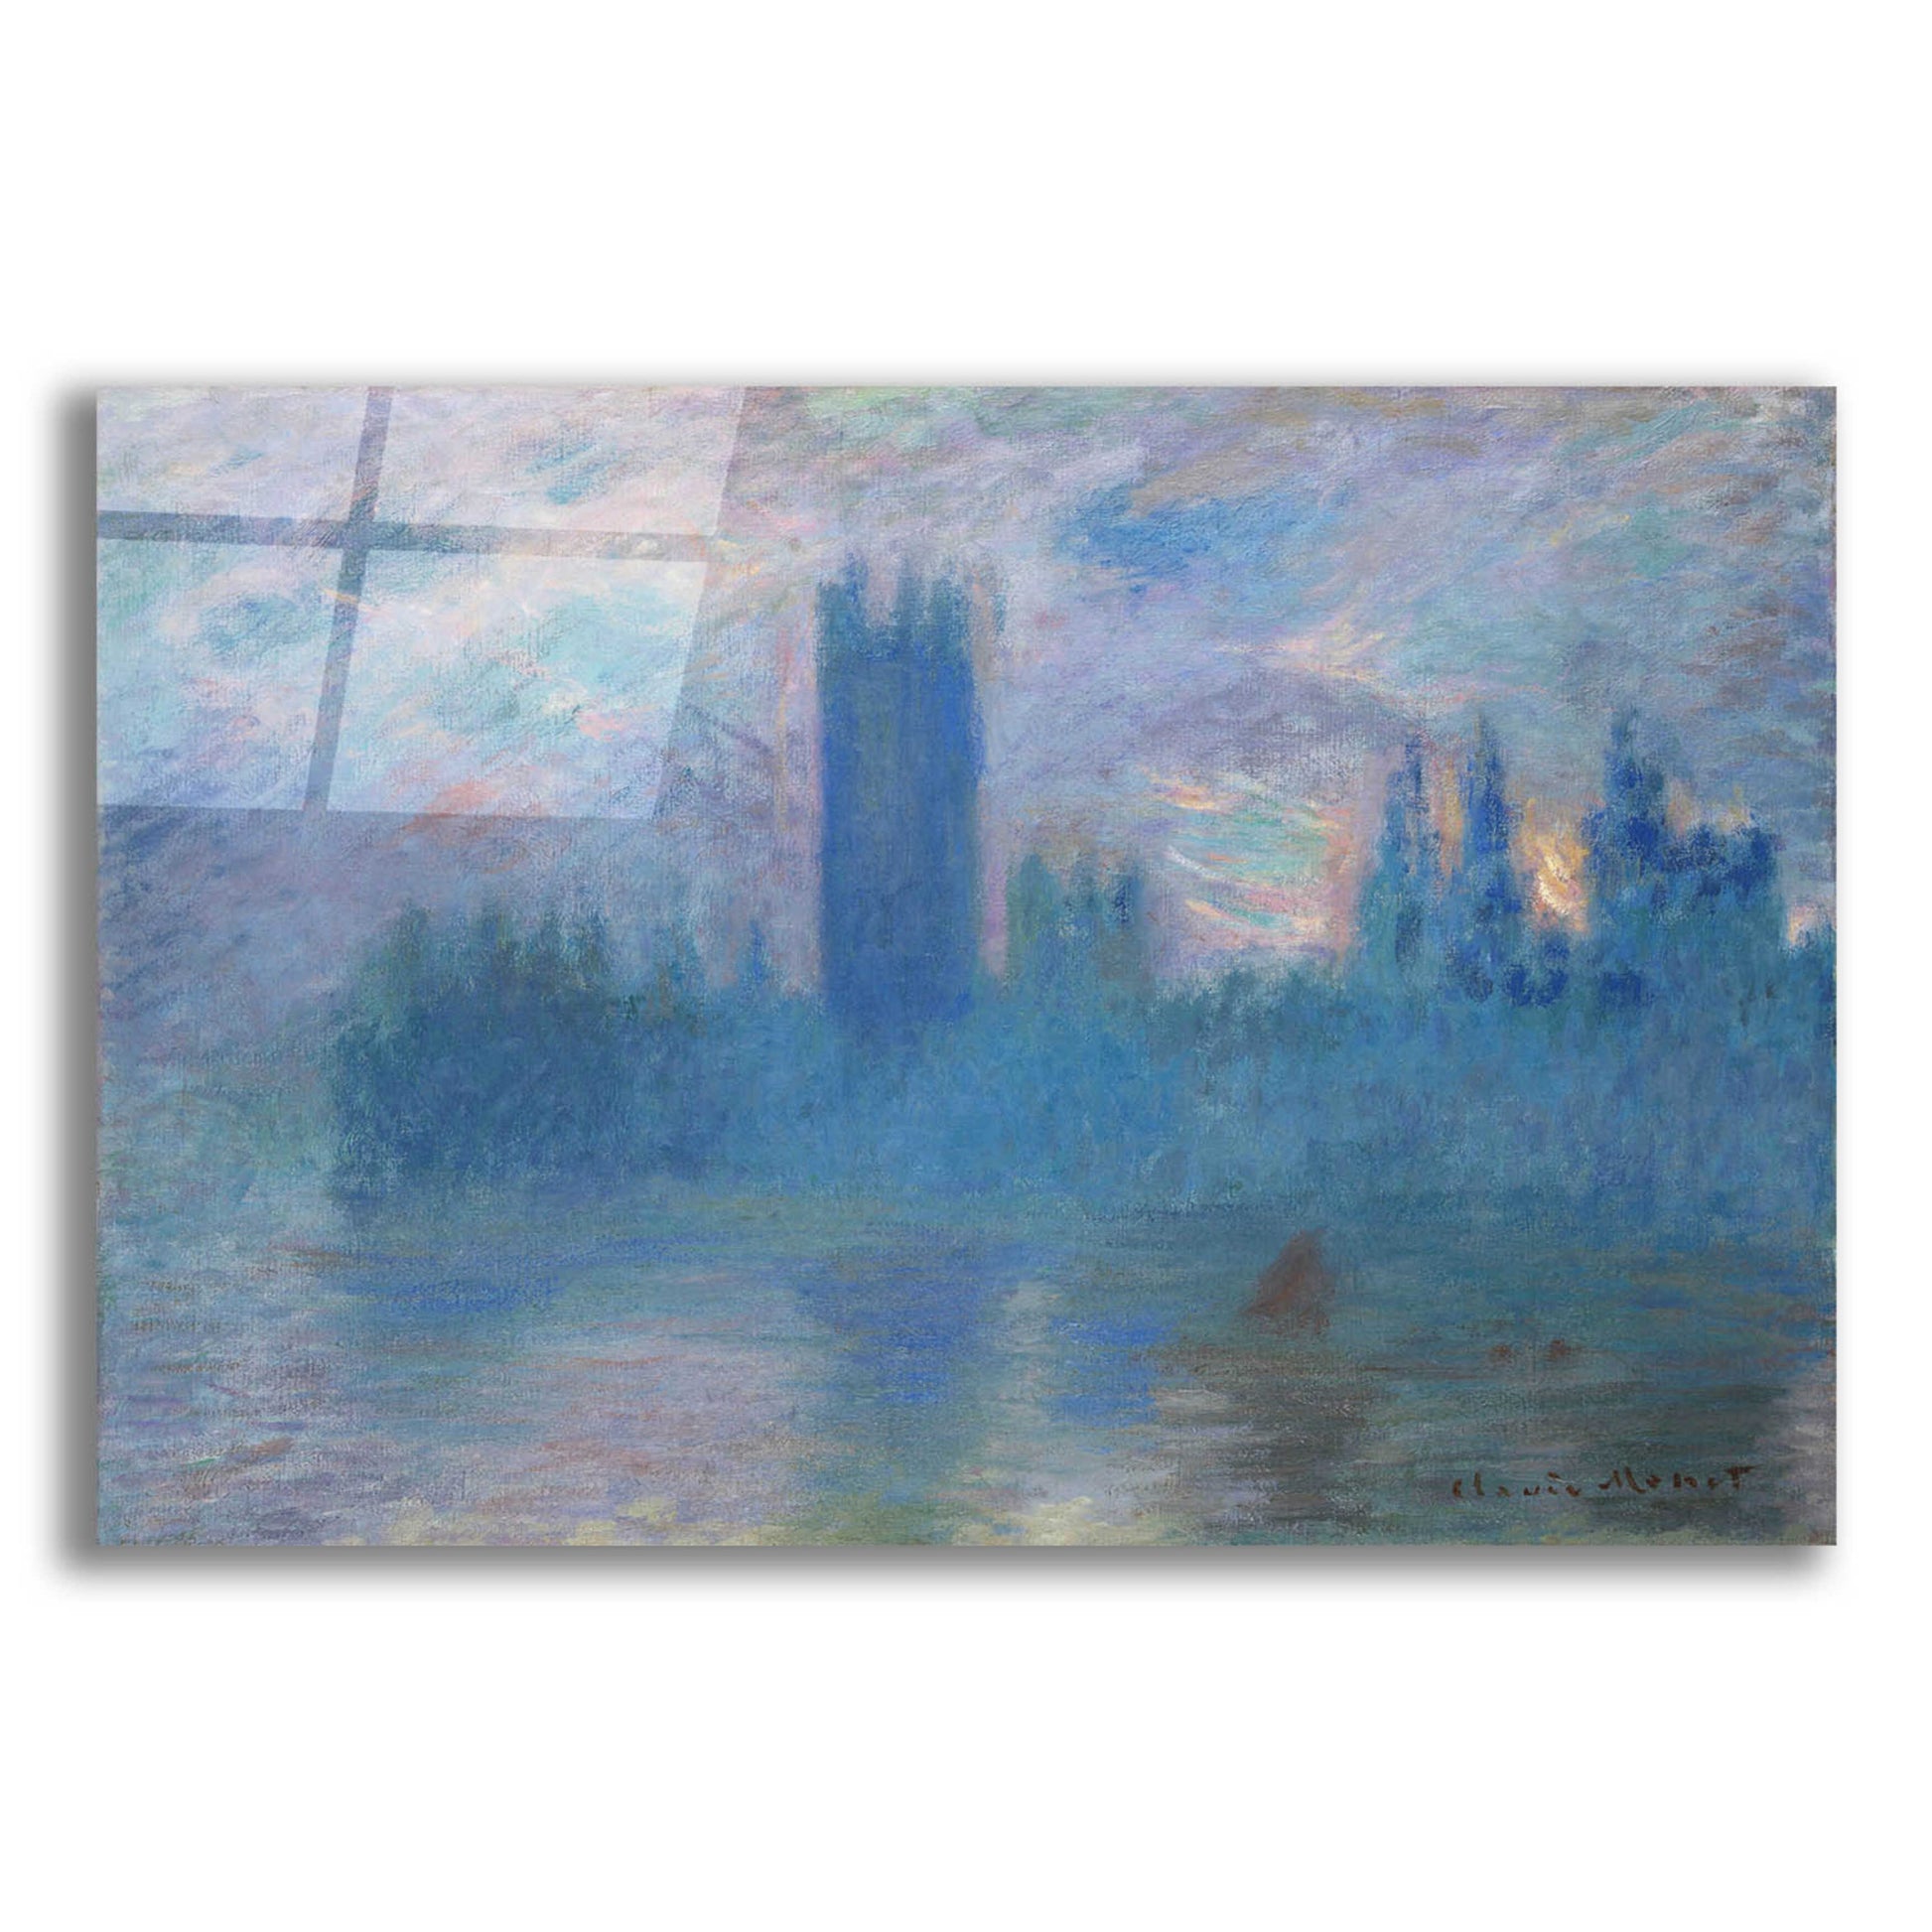 Epic Art 'Houses Of Parliament, London' by Claude Monet, Acrylic Glass Wall Art,24x16